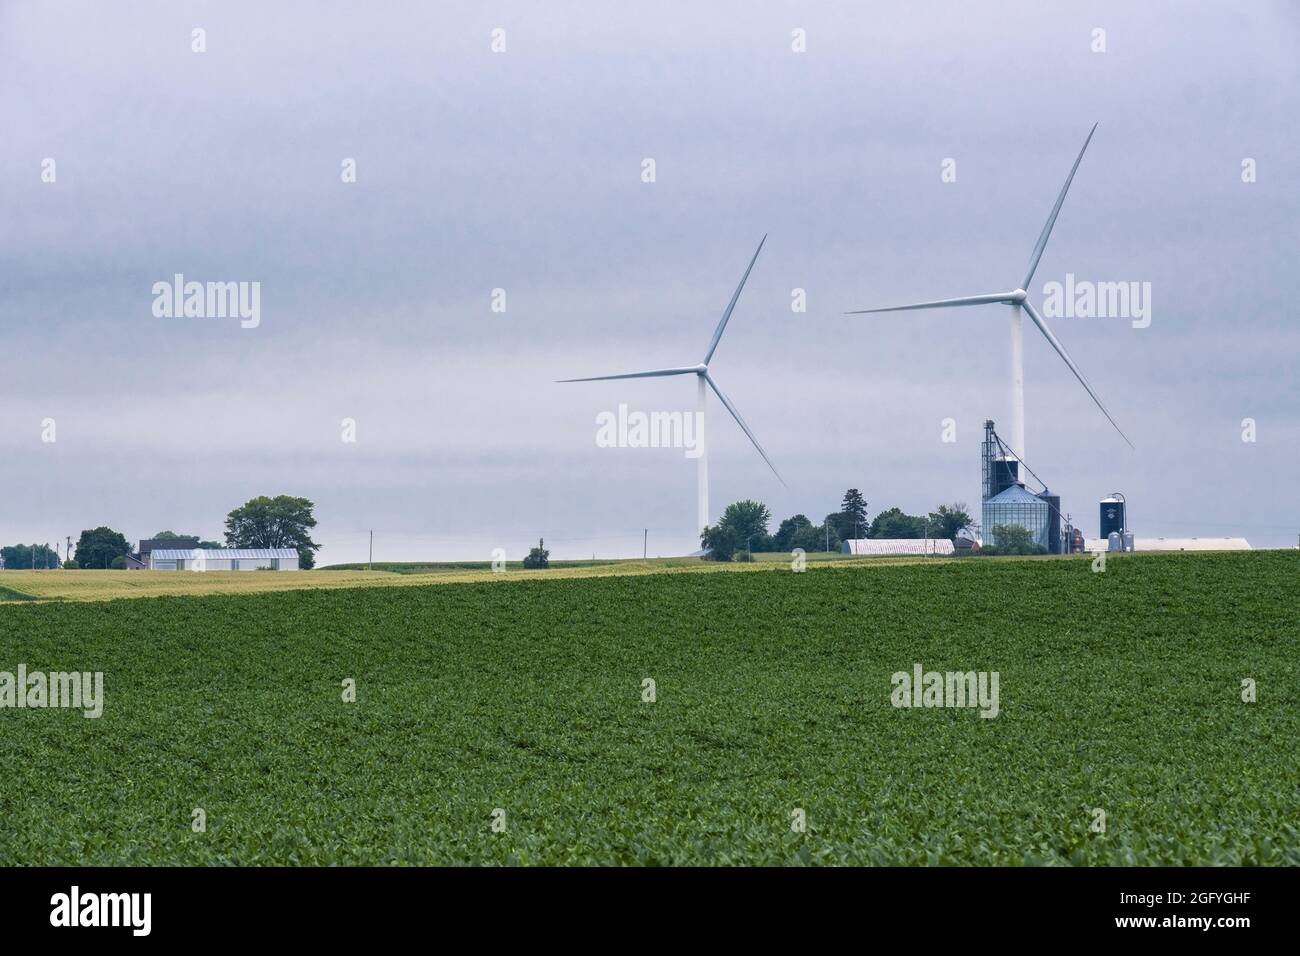 Near Earlville, Iowa.  Windmills and Grain Storage Bins. Soy Beans in foreground. Stock Photo